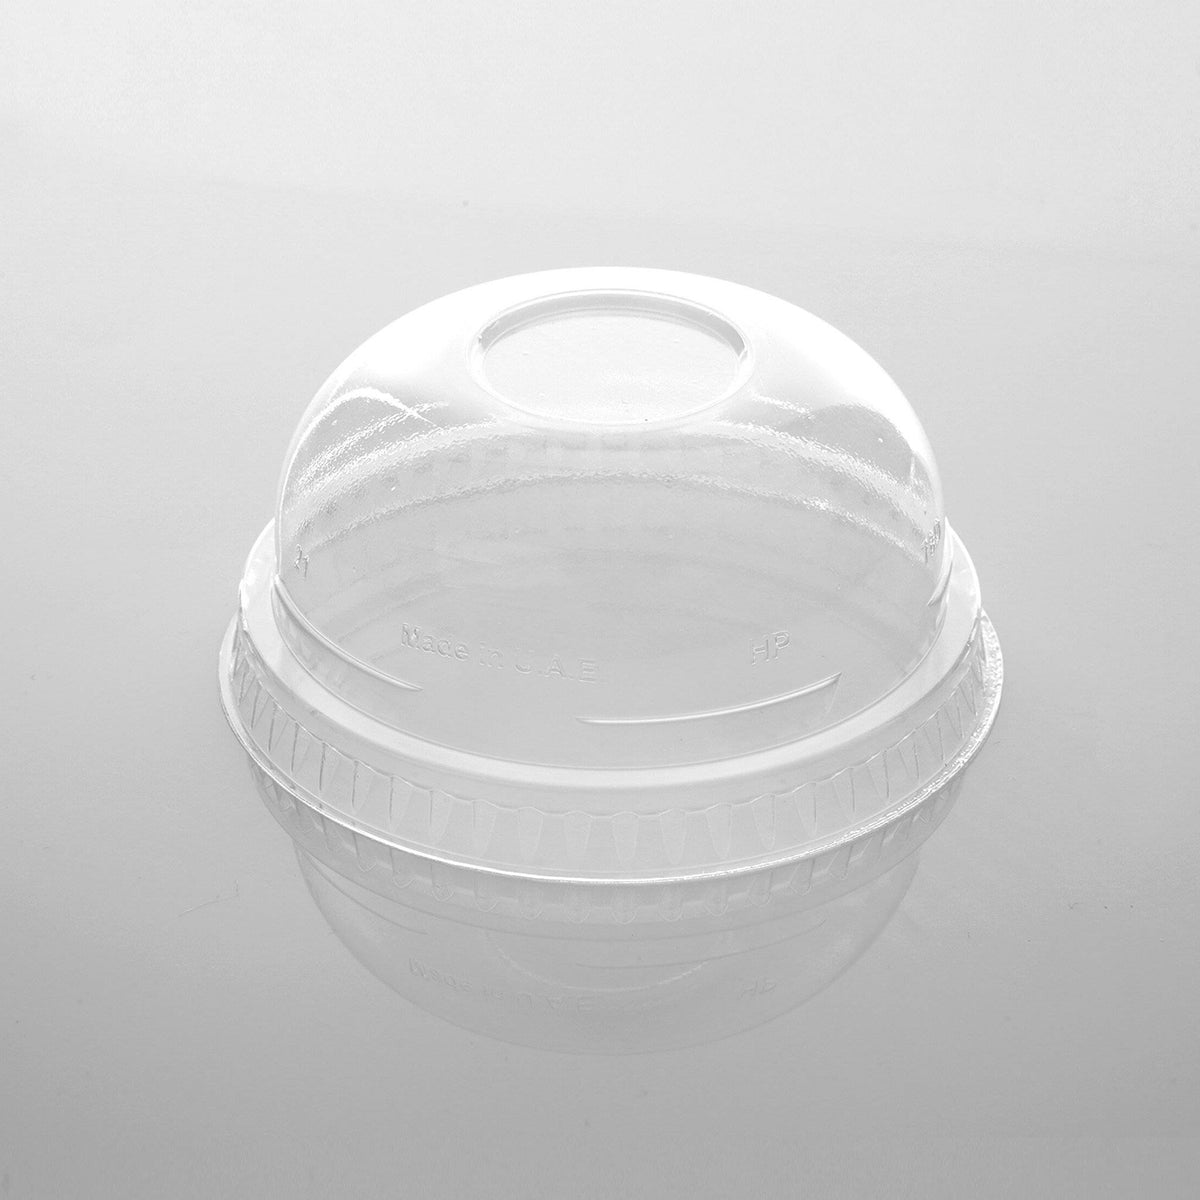 Hotpack | Dome Lid for PET Juice Cup 12/16/20/24 Oz Without Hole 98 Diameter | 1000 Pieces - Hotpack Global